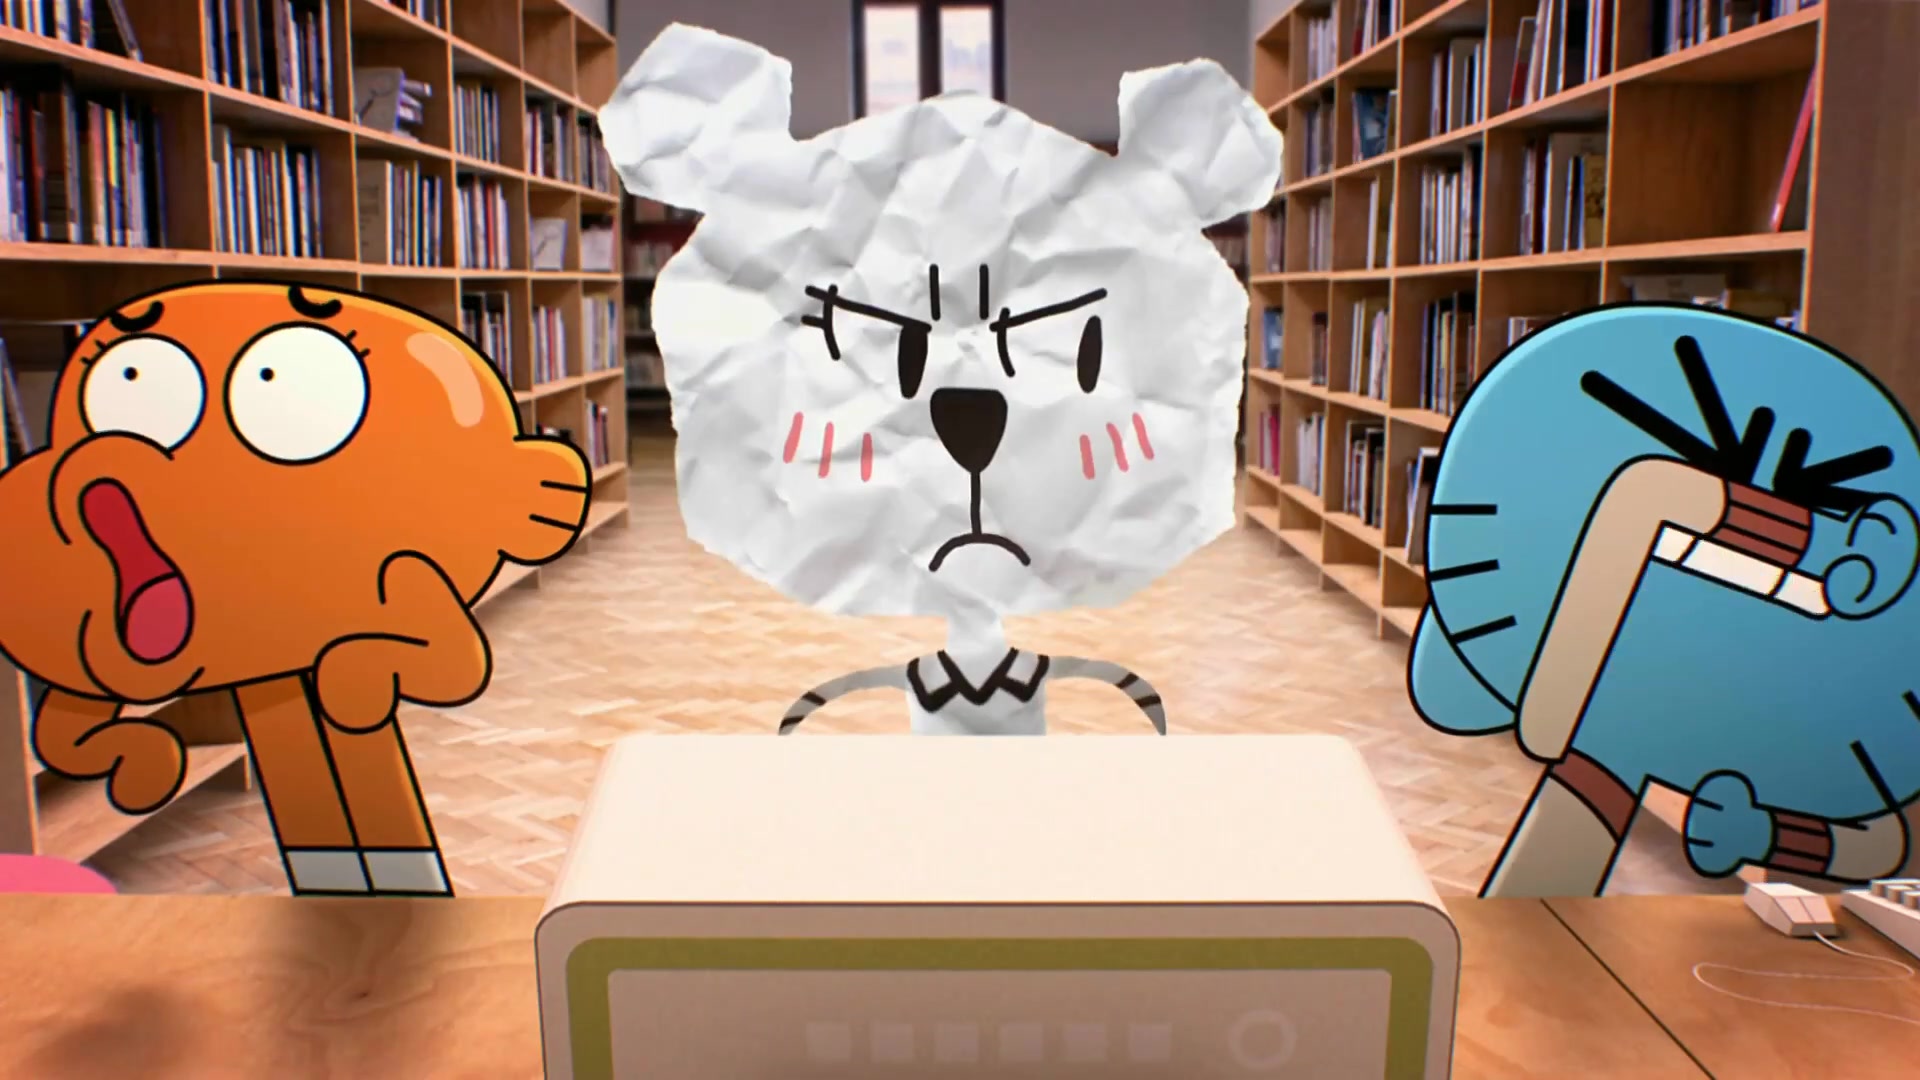 gumball s2 ep 19-20